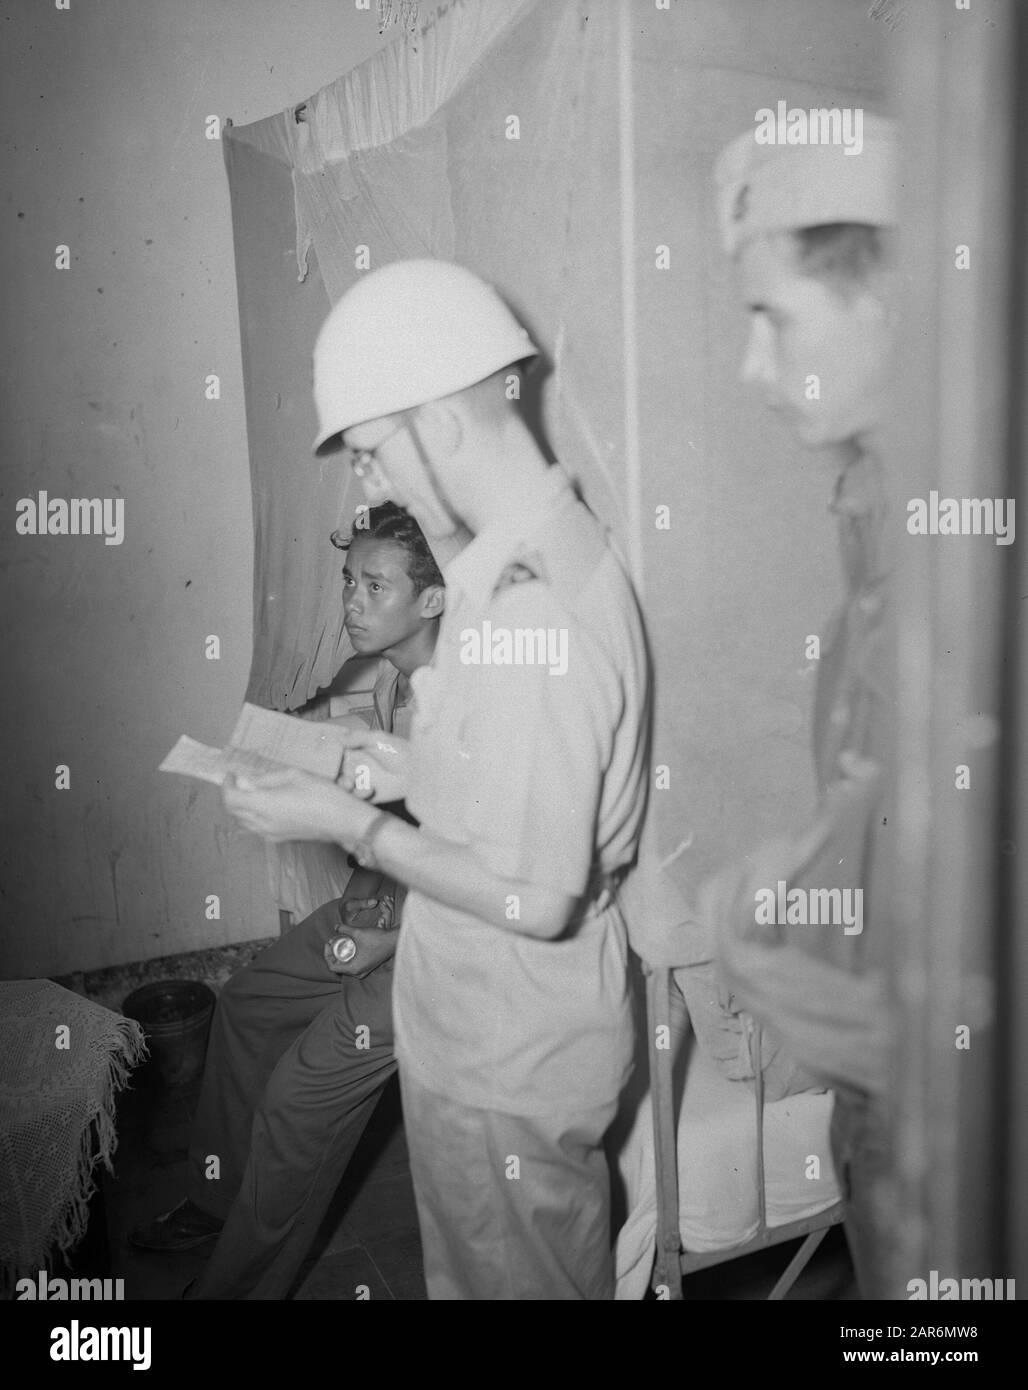 M.P. patrol Out of Bounds” neighborhoods  MP patrol in 'out of boundaries districts' [out of bounds = forbidden territory, a military term]. An MP officer checks paper Date: December 1946 Location: Batavia, Indonesia, Jakarta, Dutch East Indies Stock Photo